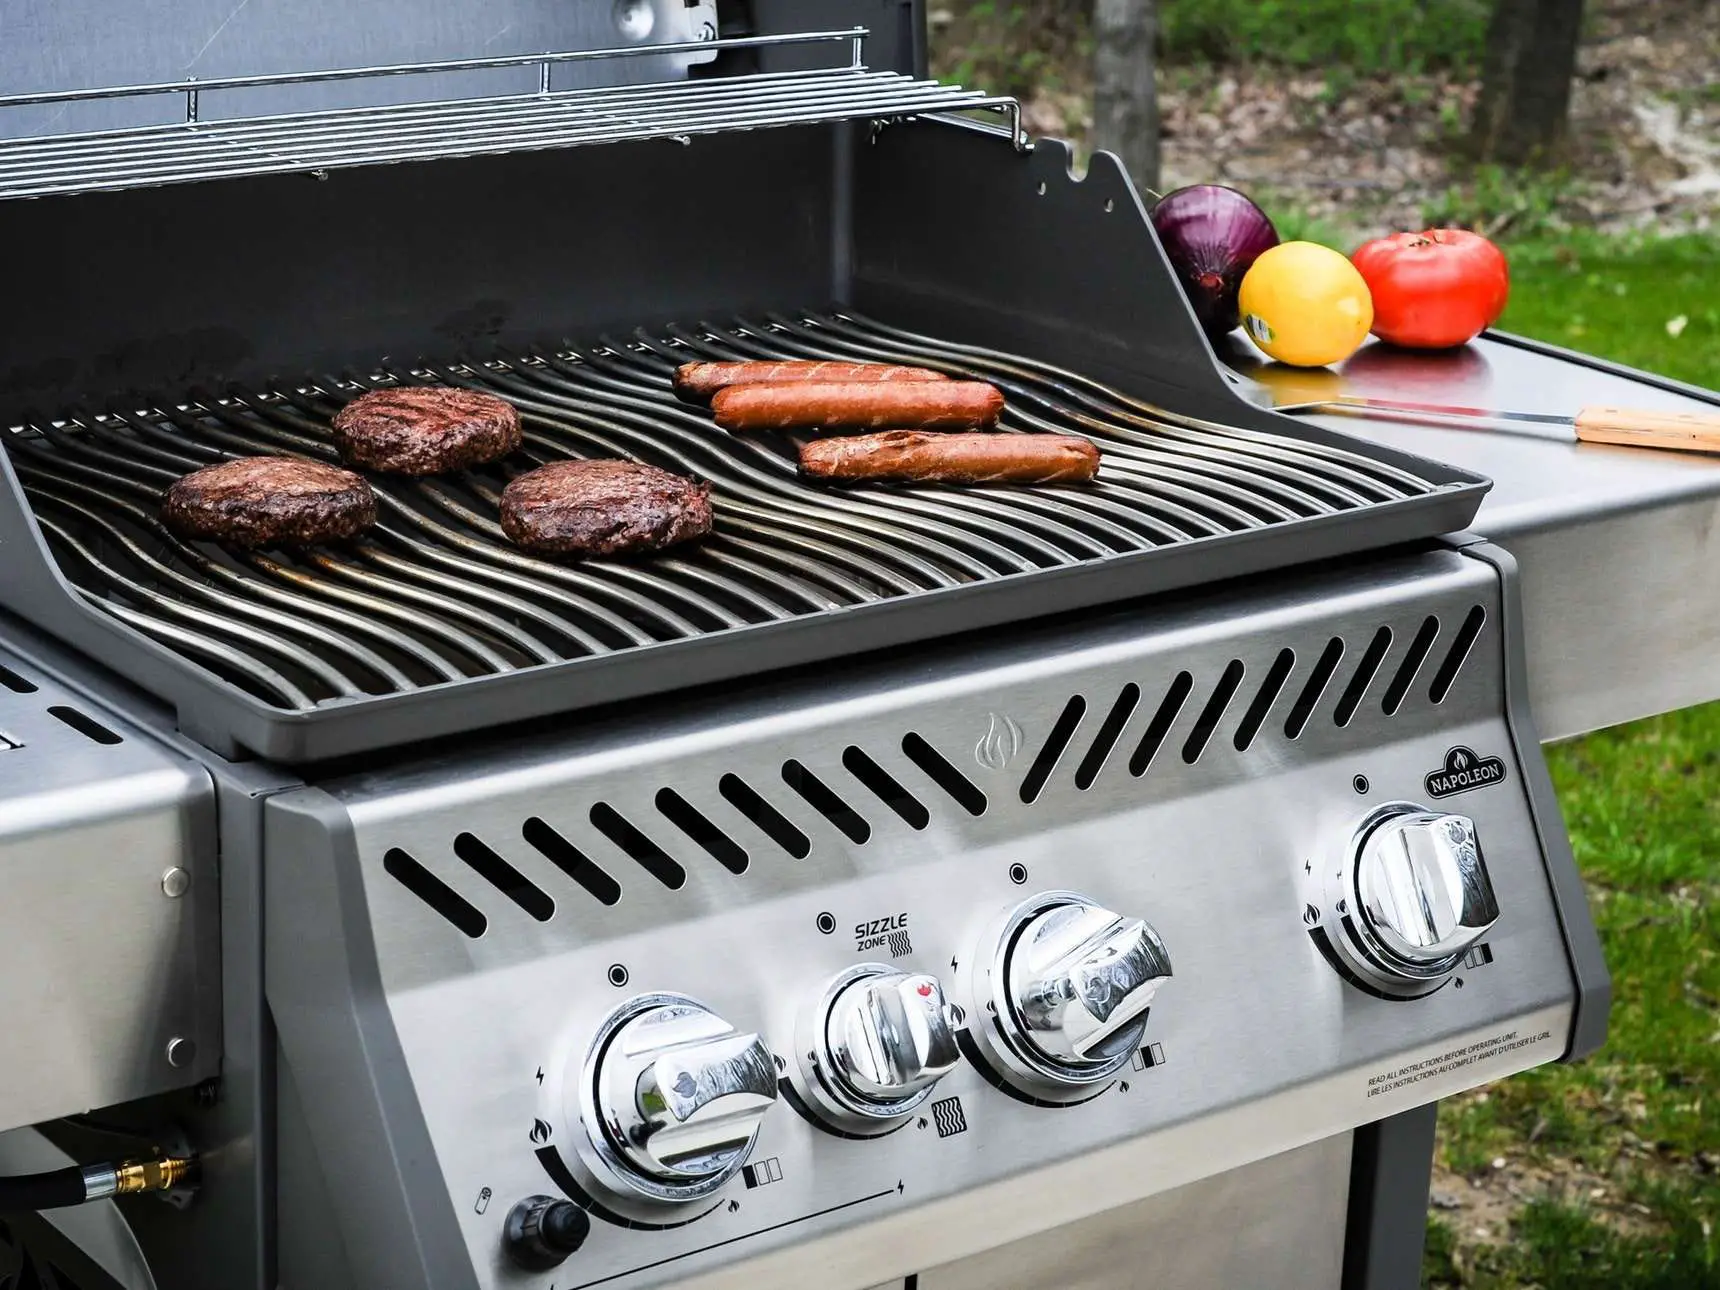 Grilling Season Is Here. These Are the Best Gas Grills